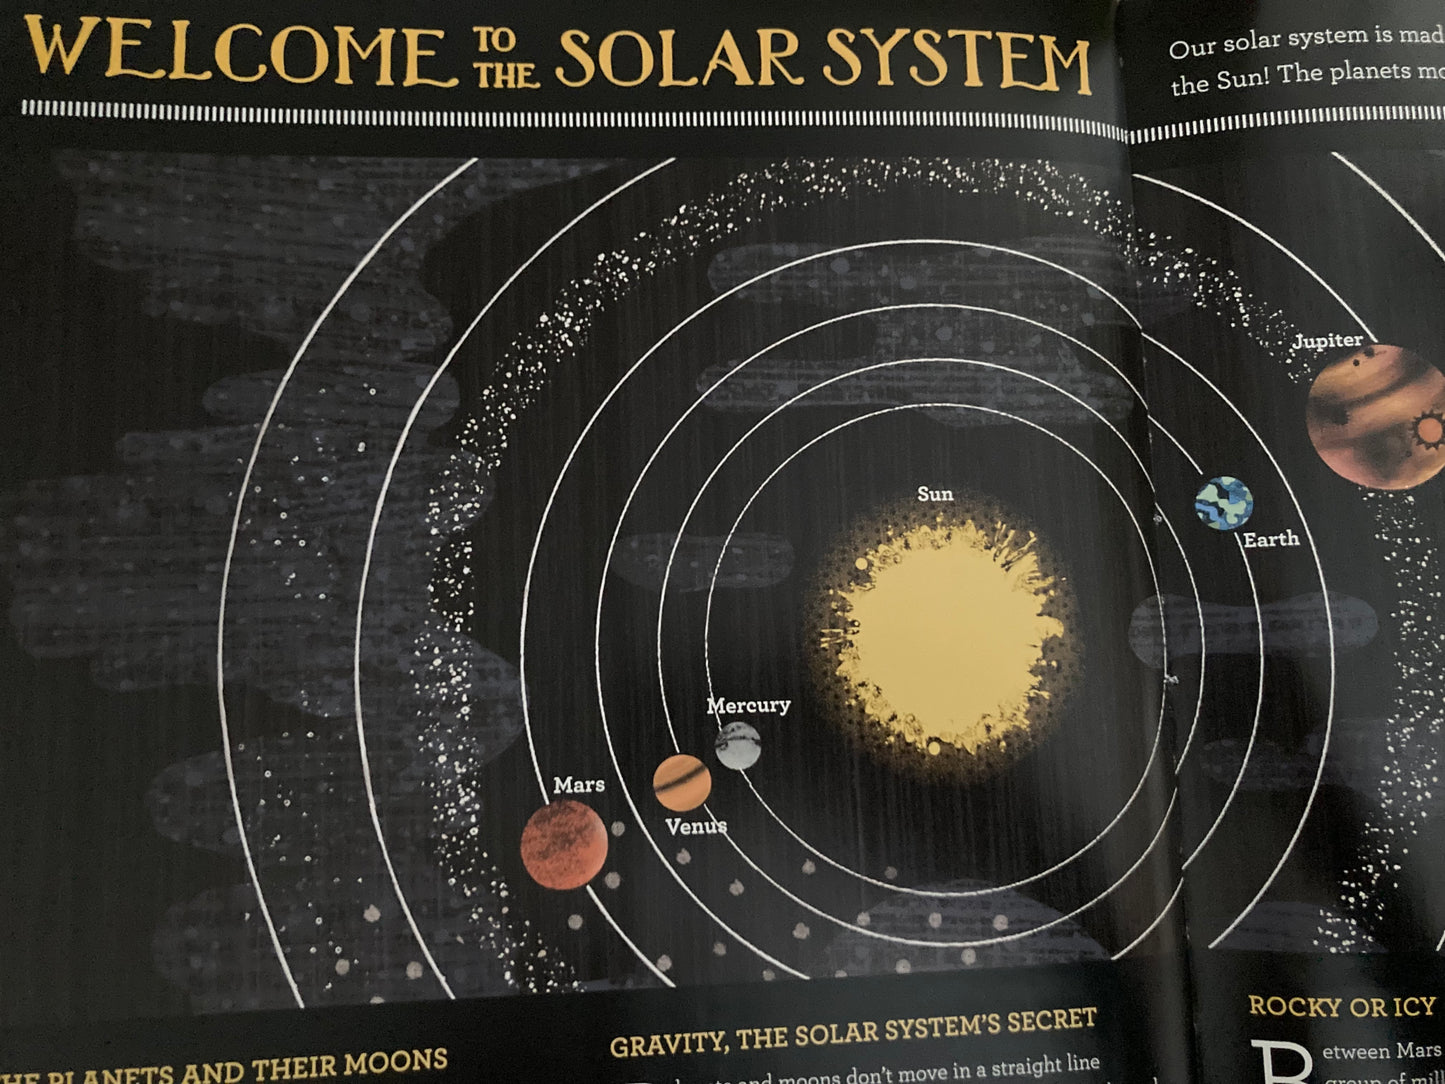 Educational Resource Book - SOLAR SYSTEM